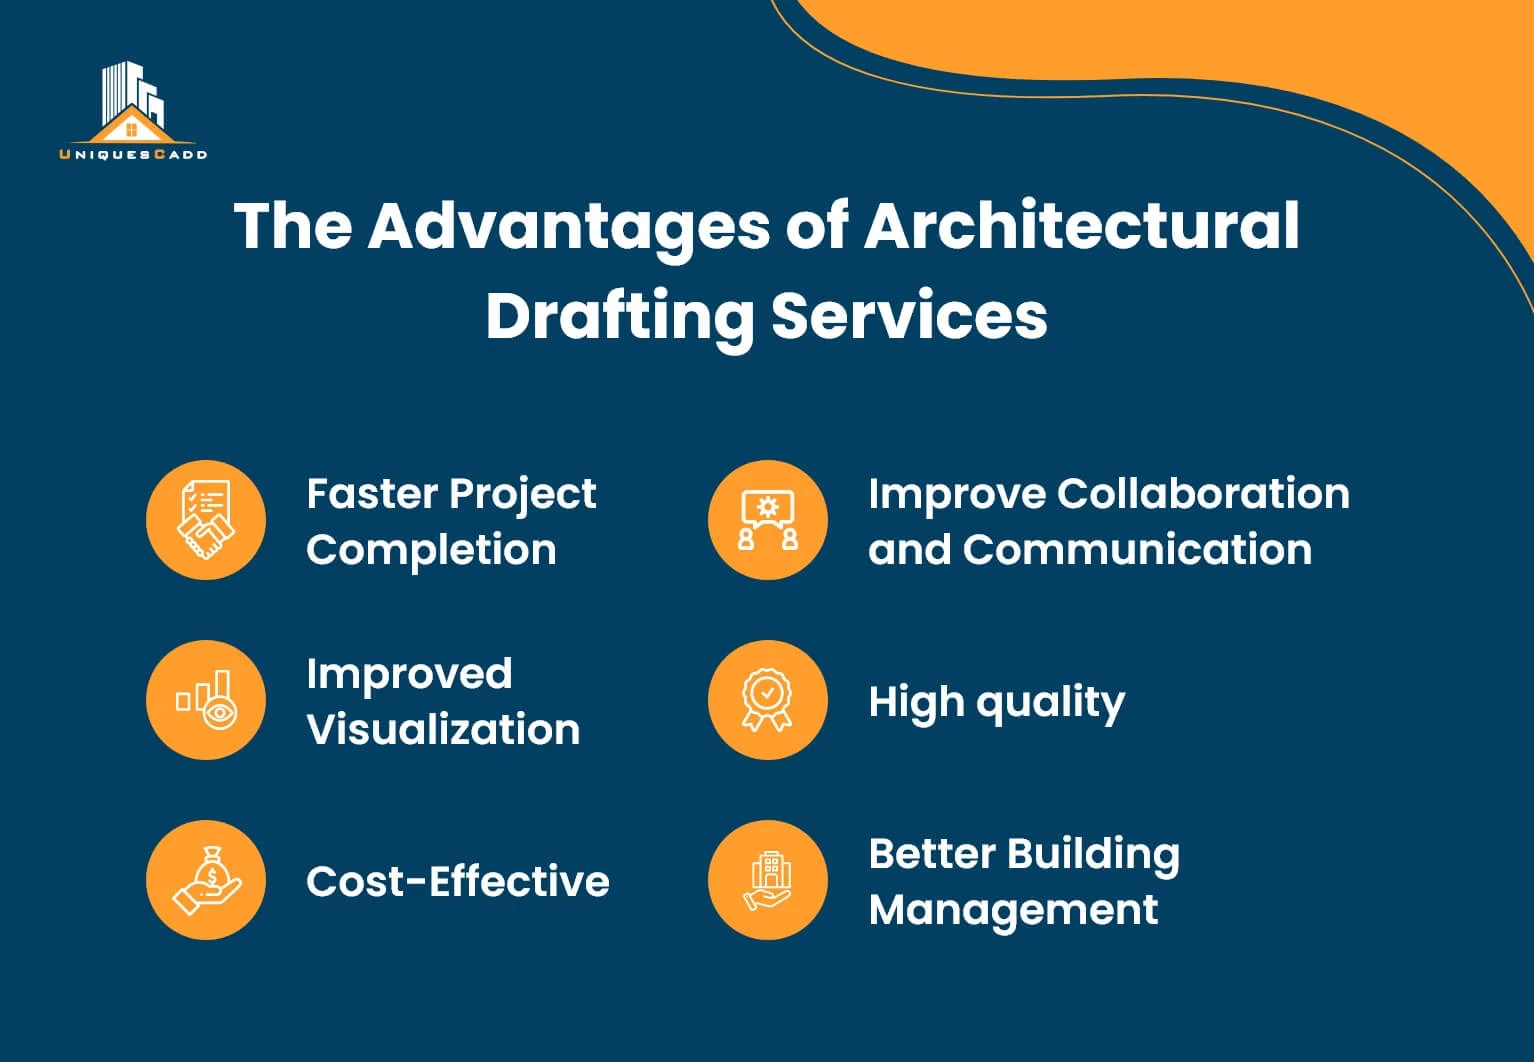 The Advantages of Architectural Drafting Services